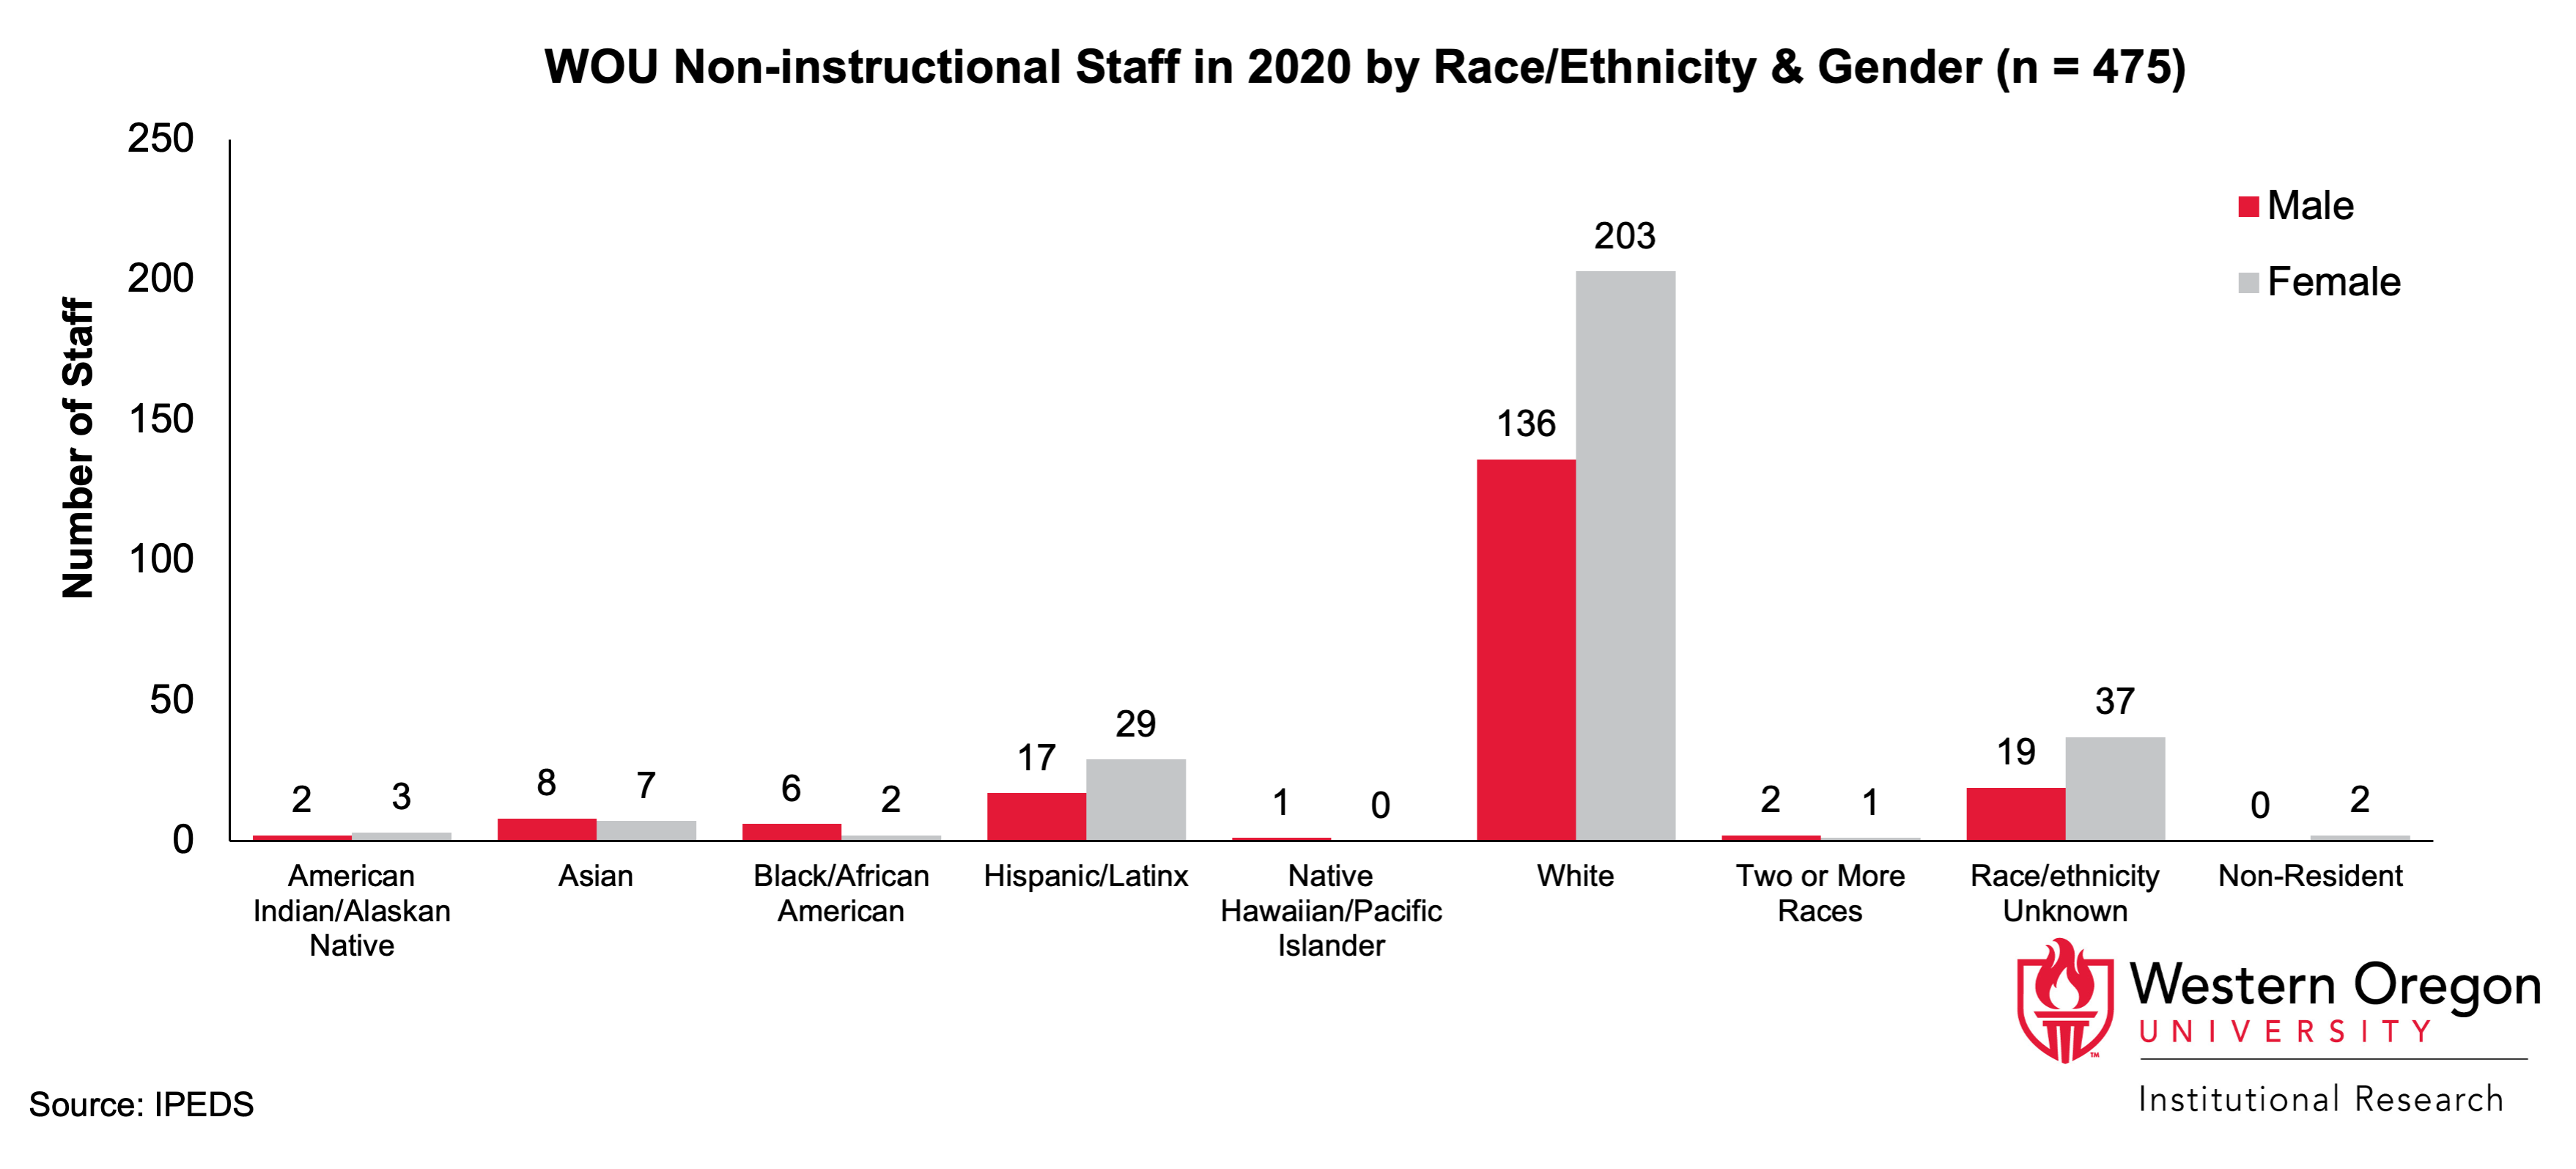 Bar graph of WOU non-instructional staff in 2020 by race/ethnicity and gender, showing that white females make up the largest proportion of WOU's staff.